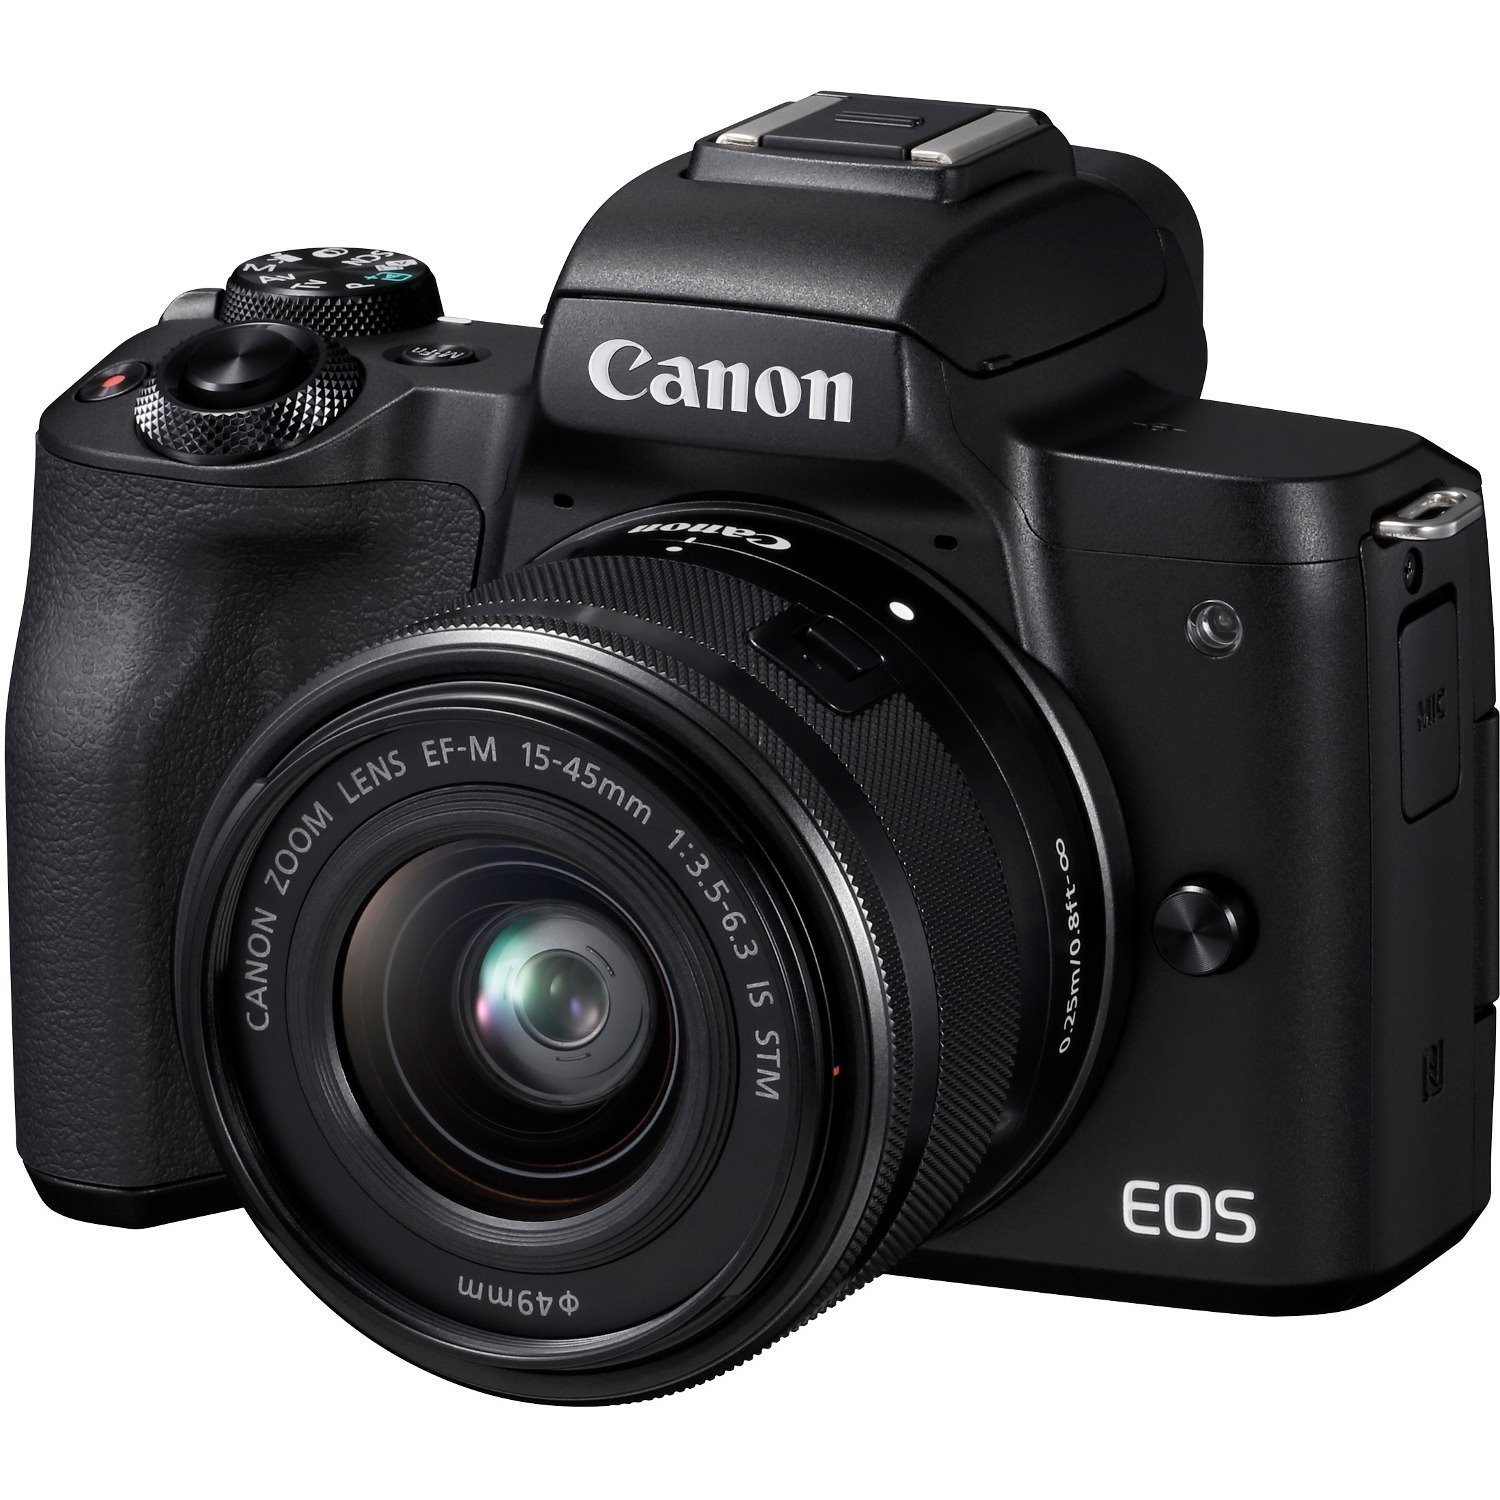 Canon EOS M50 24.1 Megapixel Mirrorless Camera with Lens - 15 mm - 45 mm - Black